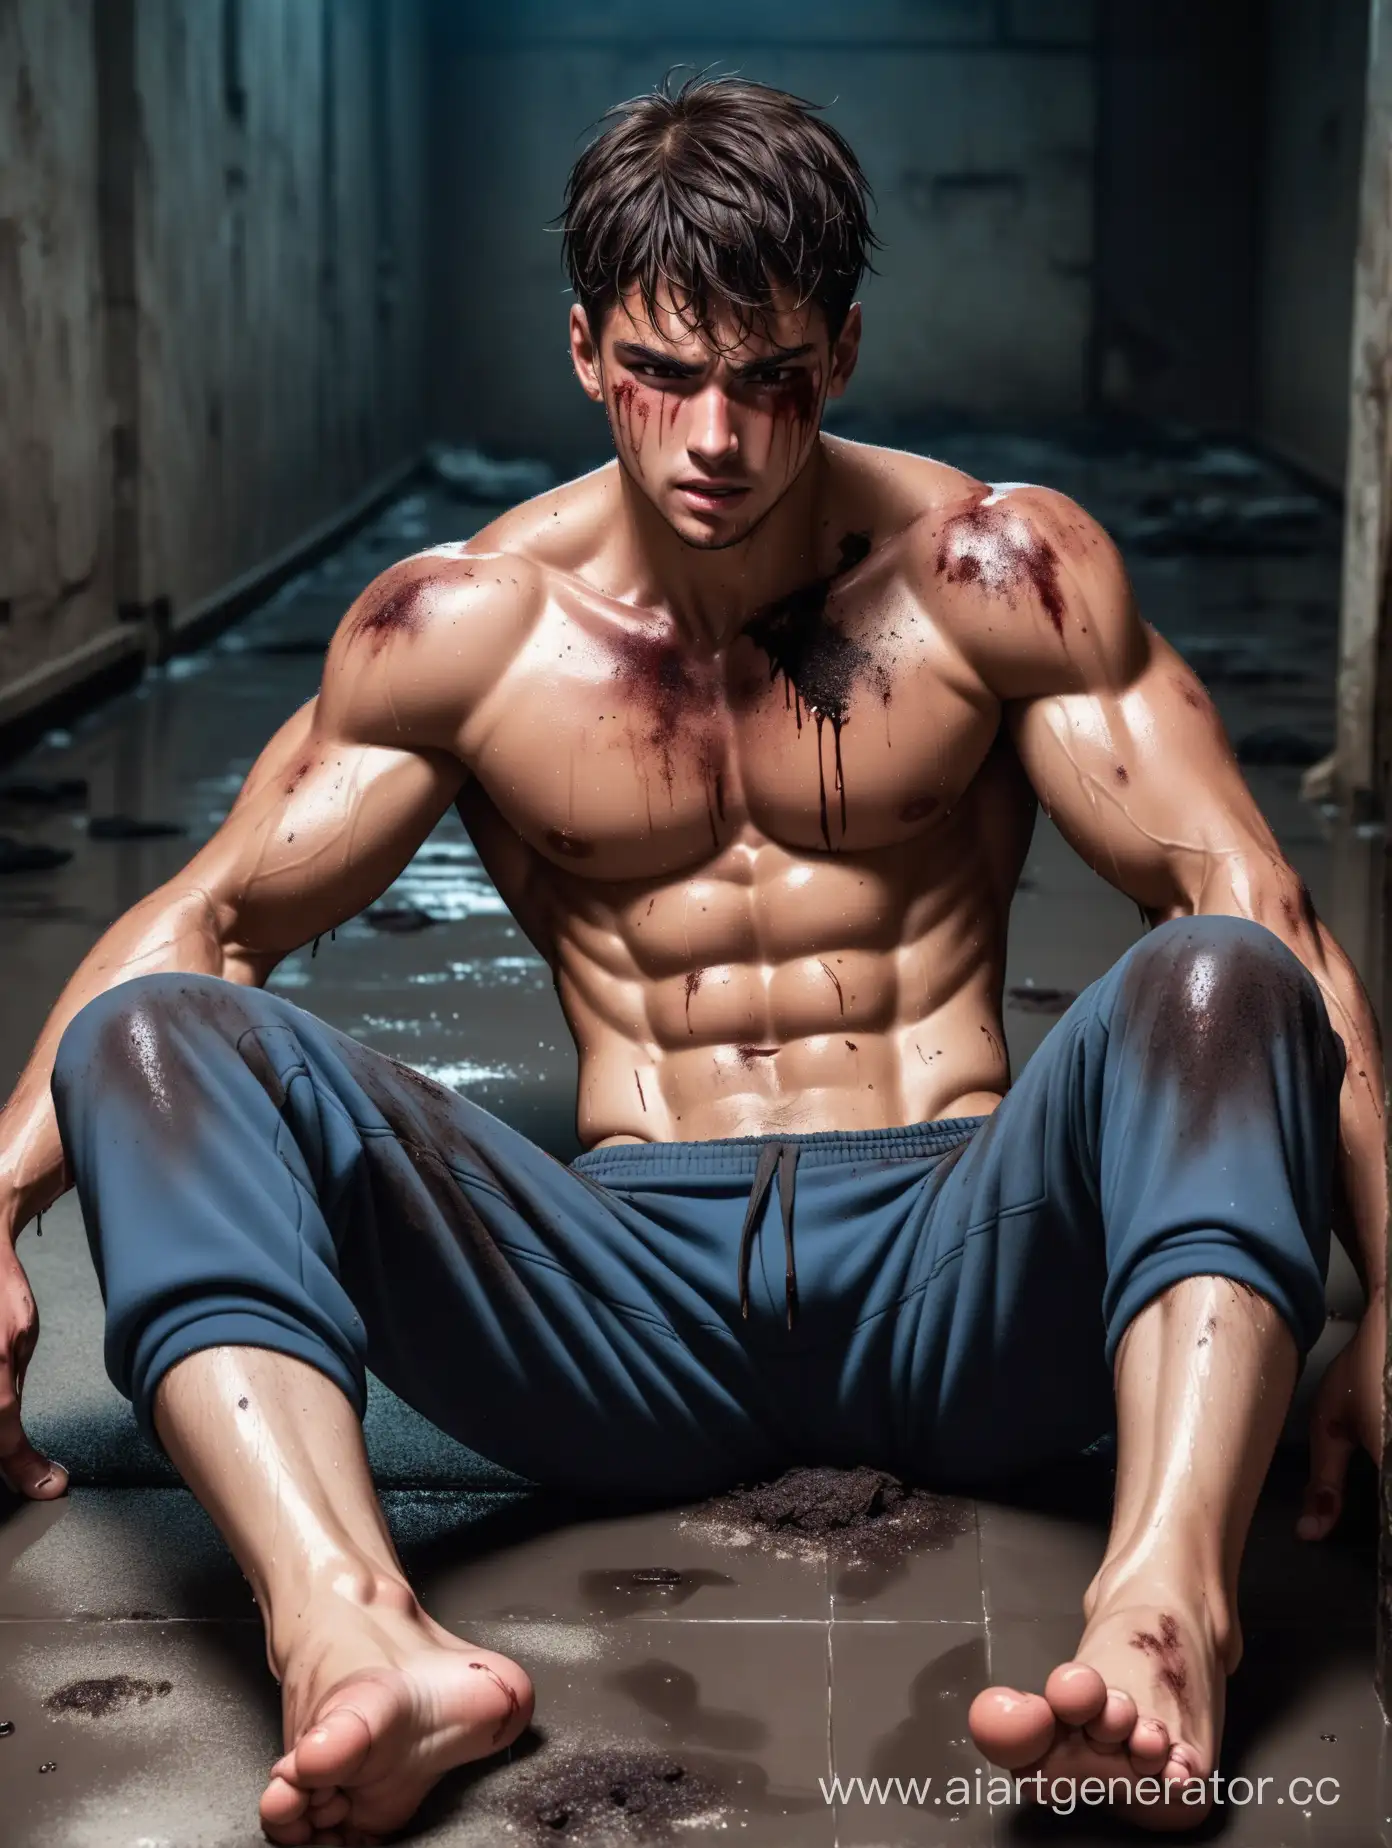 Agonized-Muscular-Young-Man-with-Gunshot-Wounds-in-Abandoned-Setting